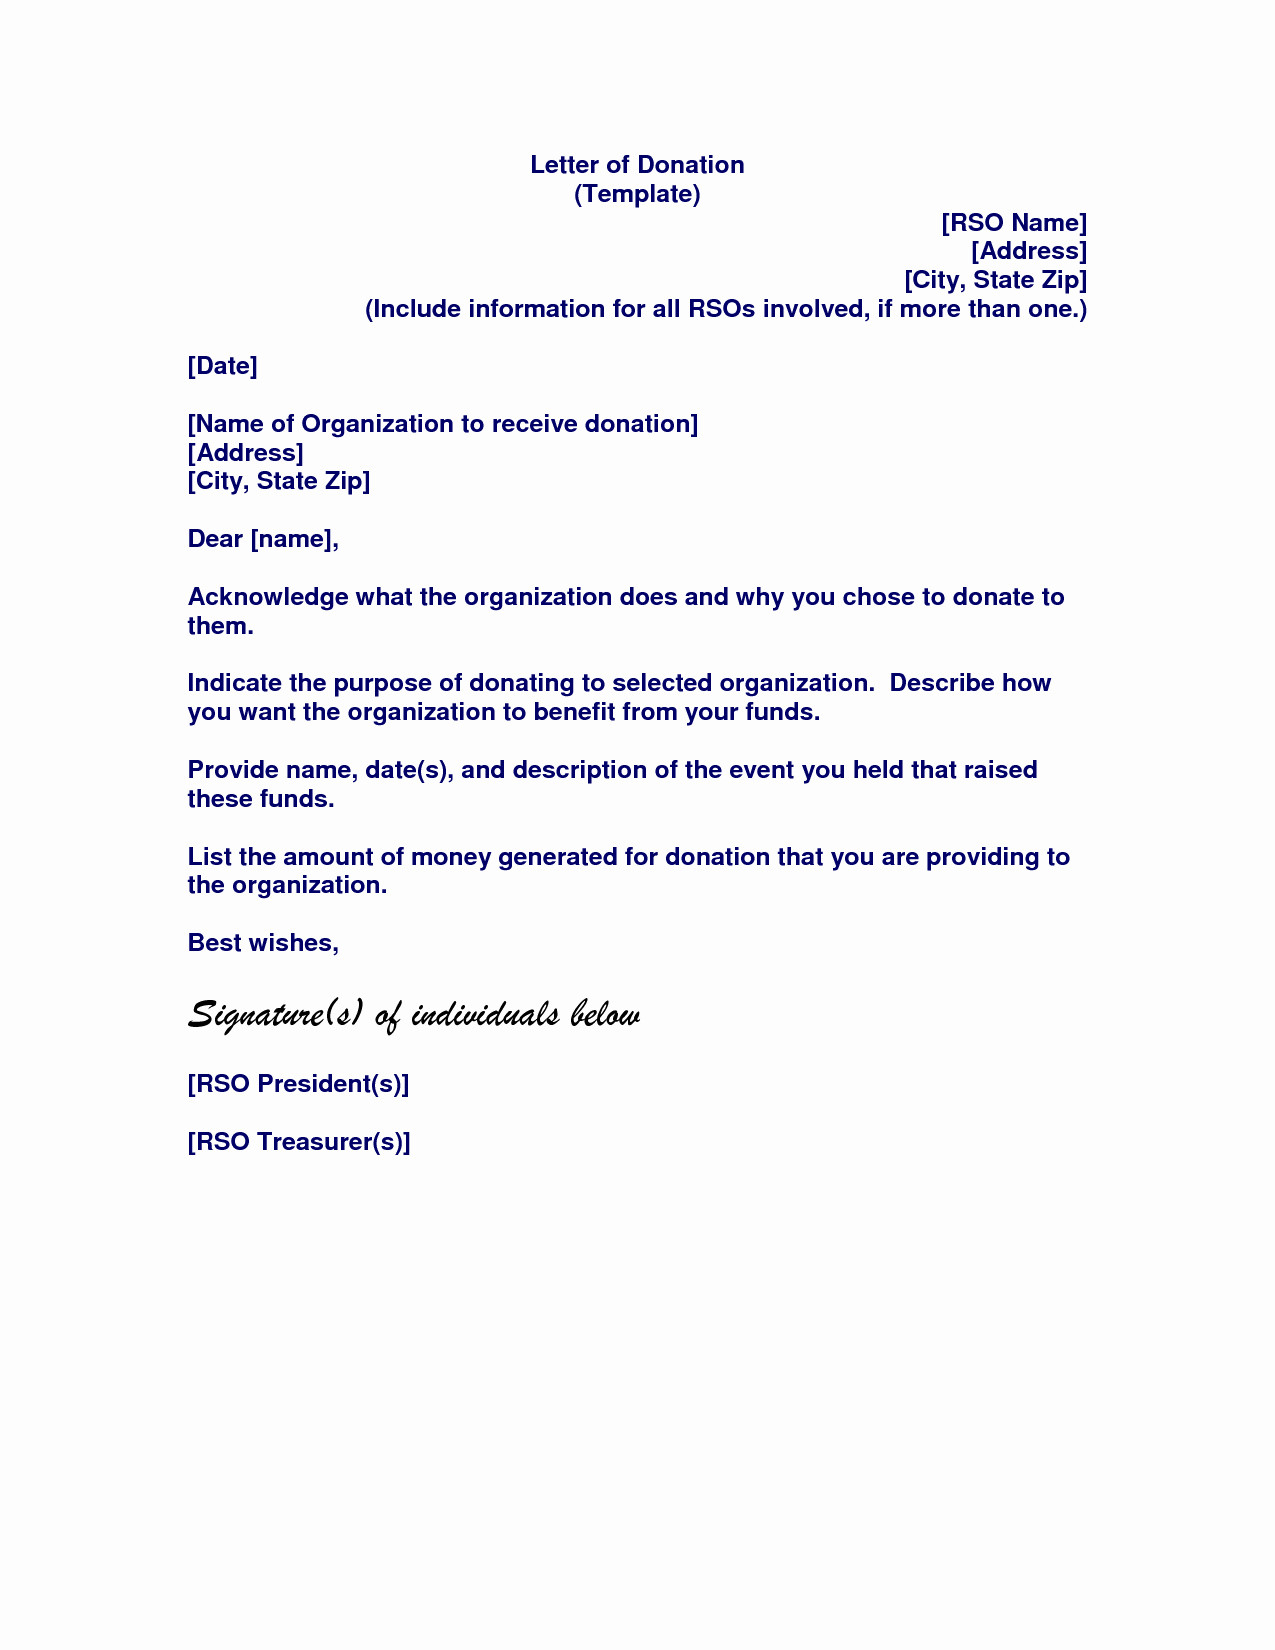 Memorial Donation Letter Template formal Request Letter format Example